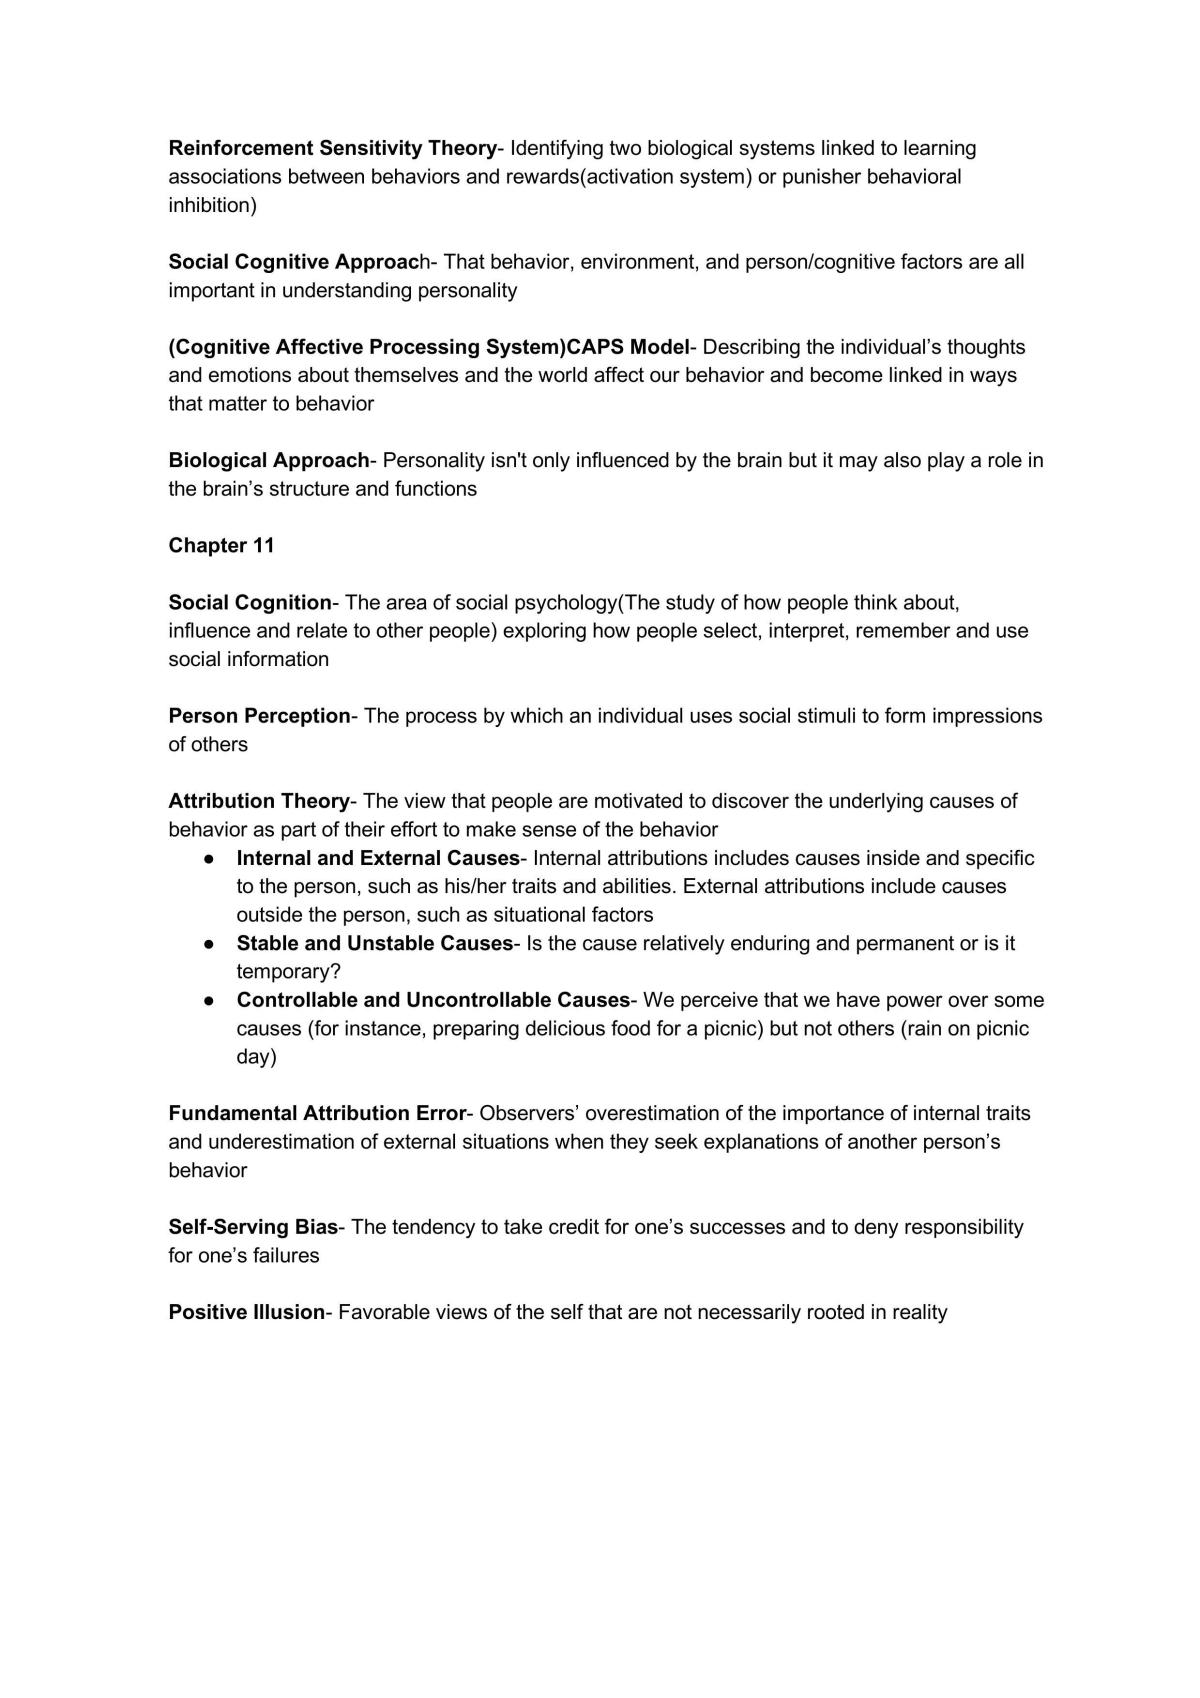 Elementary Psychology Finals Study Guide - Page 14